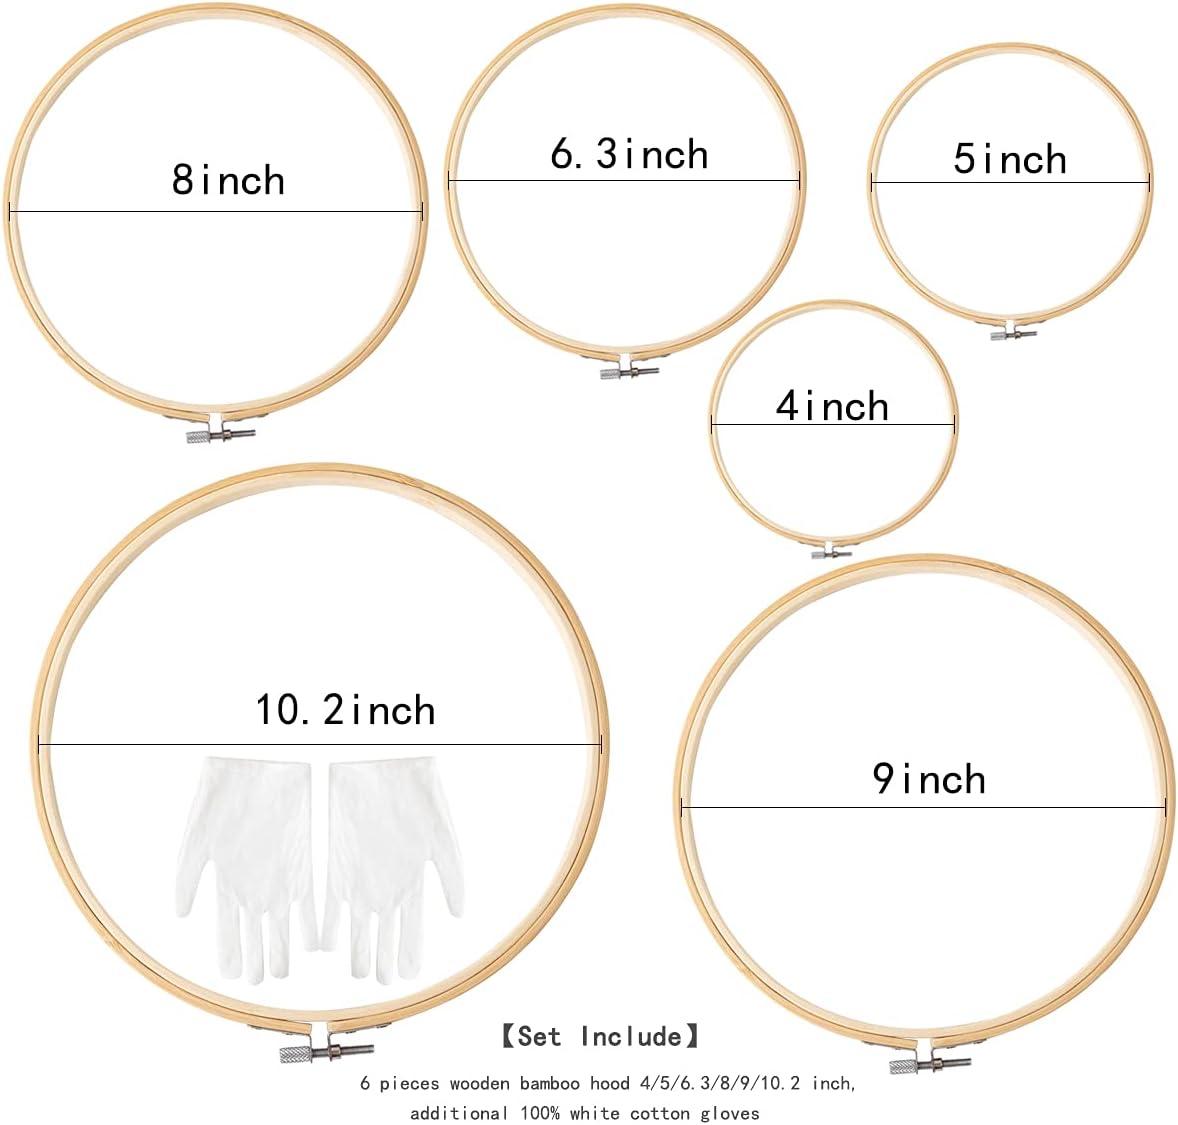 Embroidery Hoop, Casewin 1PCS 4 inch Cross Stitch Supplies & Needlework  Supplies Easily Loosen/Tighten Bamboo Wooden Hoops for Crafts 